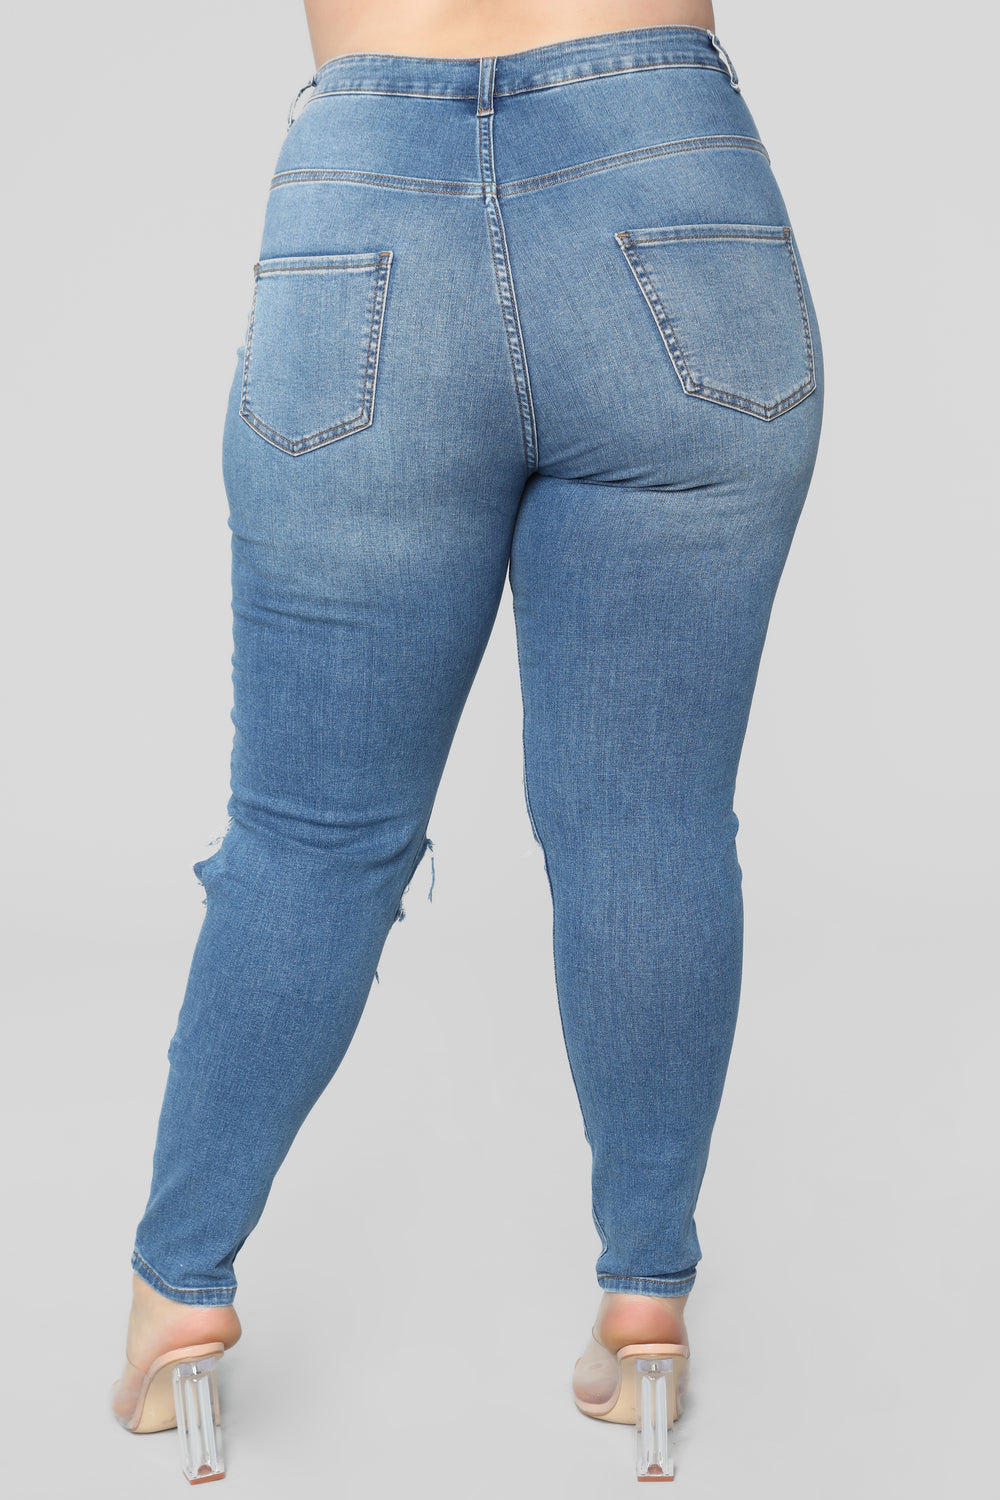 Get With It Distressed Jeans - Medium Blue Wash